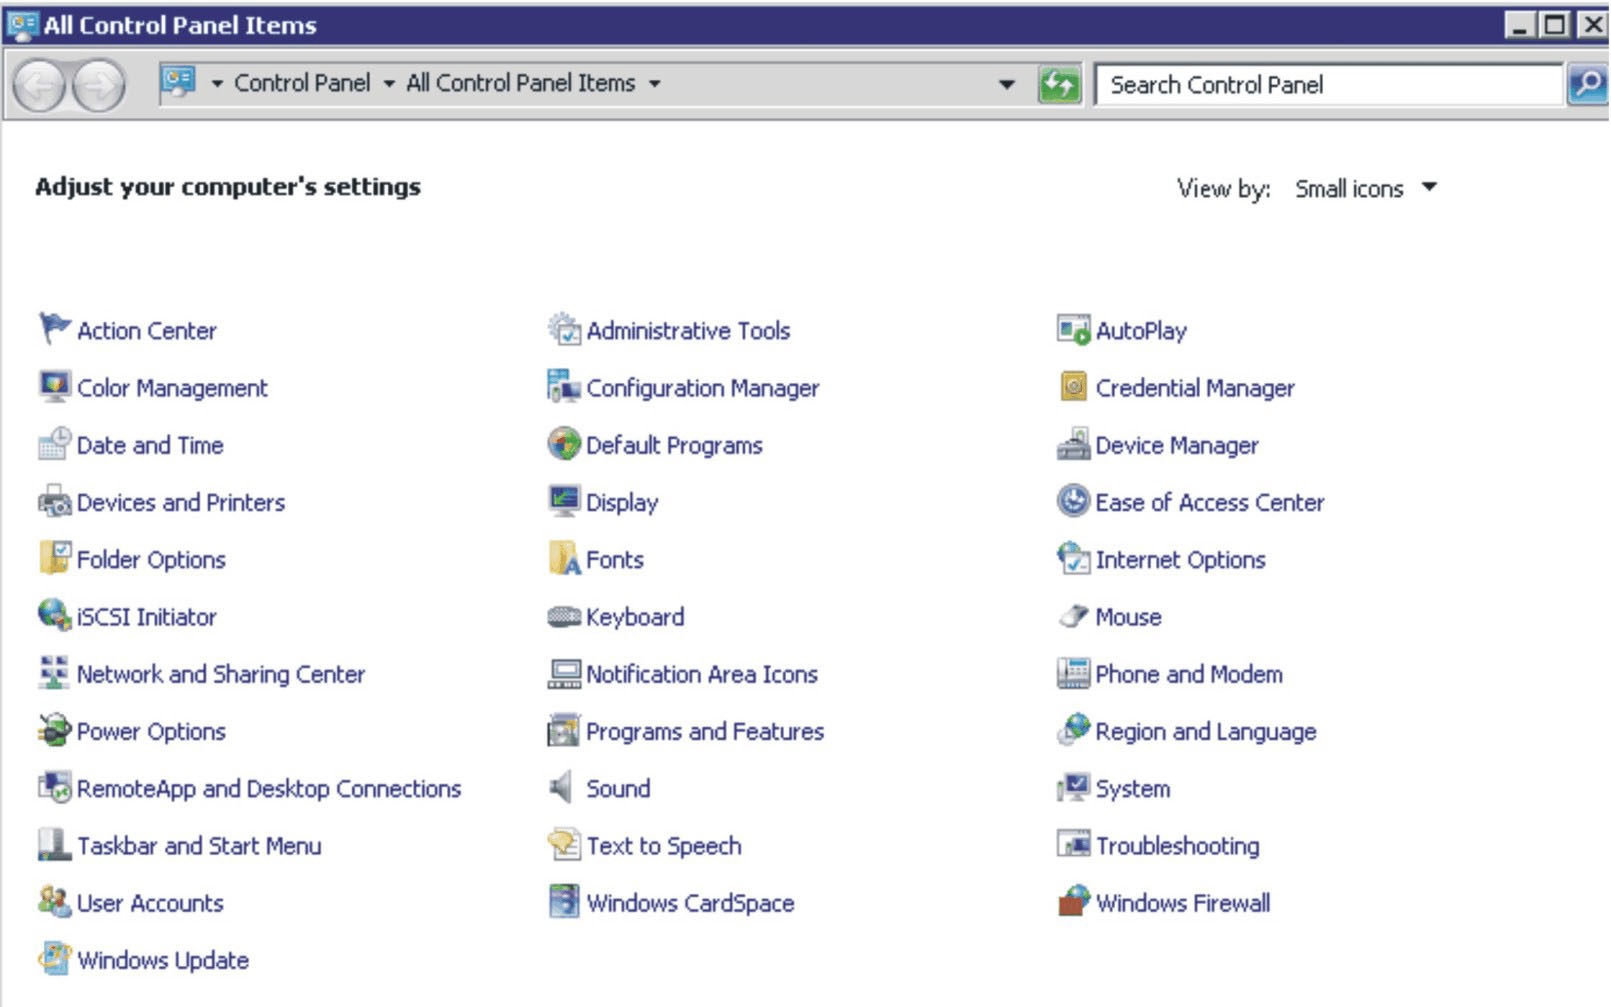 Configuration Manager in Control Panel folder